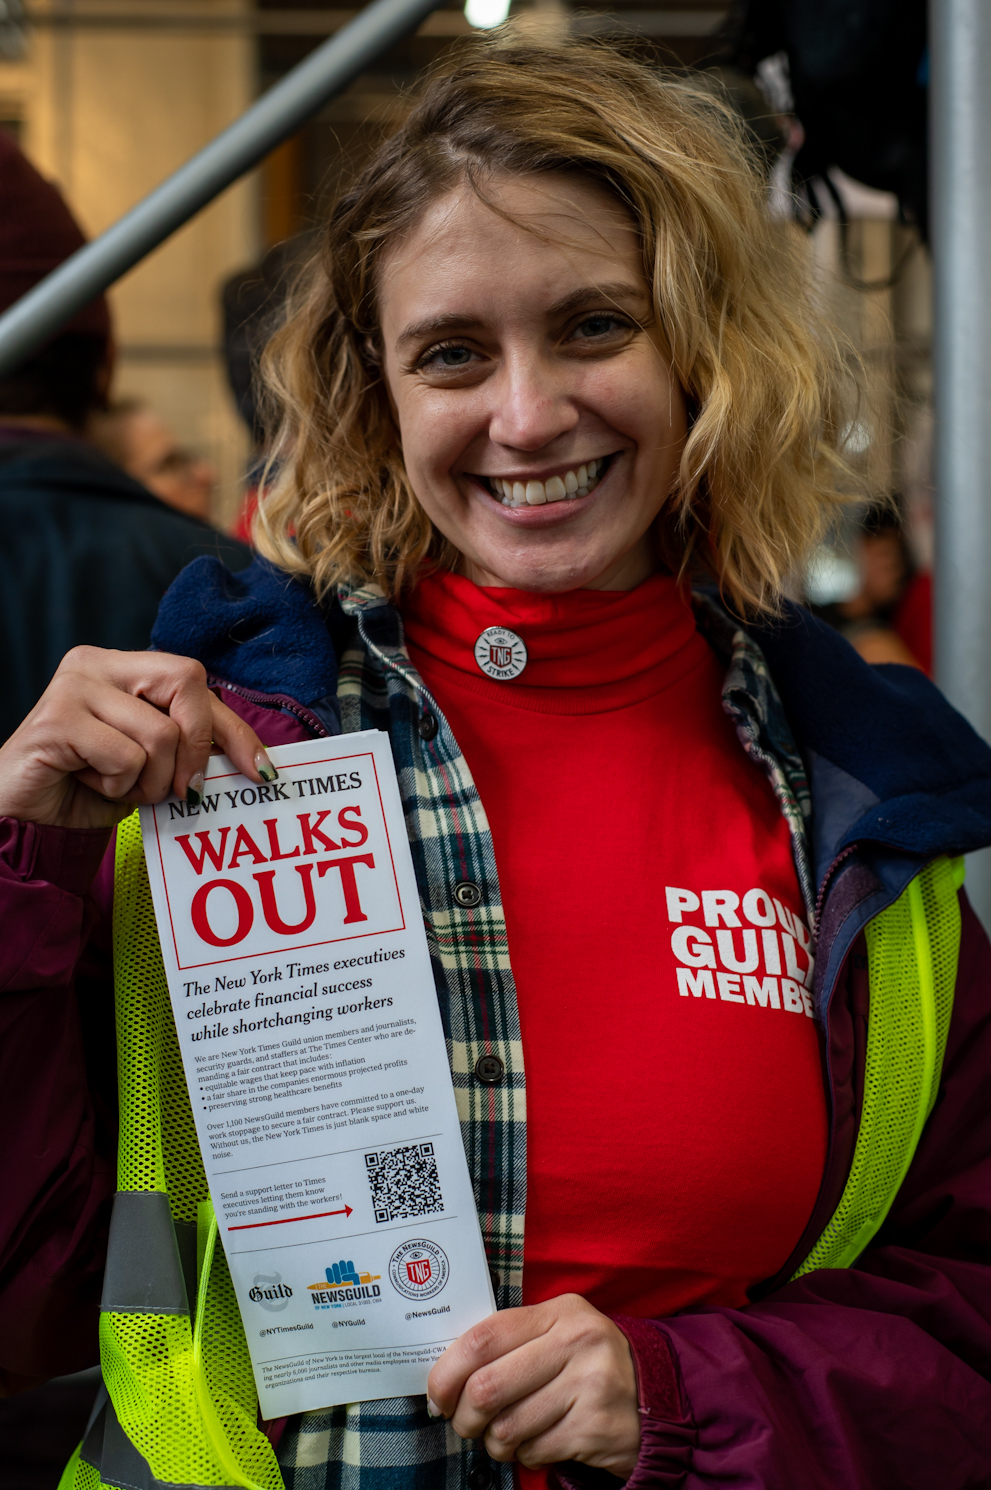 Phoebe Lett, a woman with short blond hair wearing a red shirt, holds a flier that reads “New York Times Walks Out.”